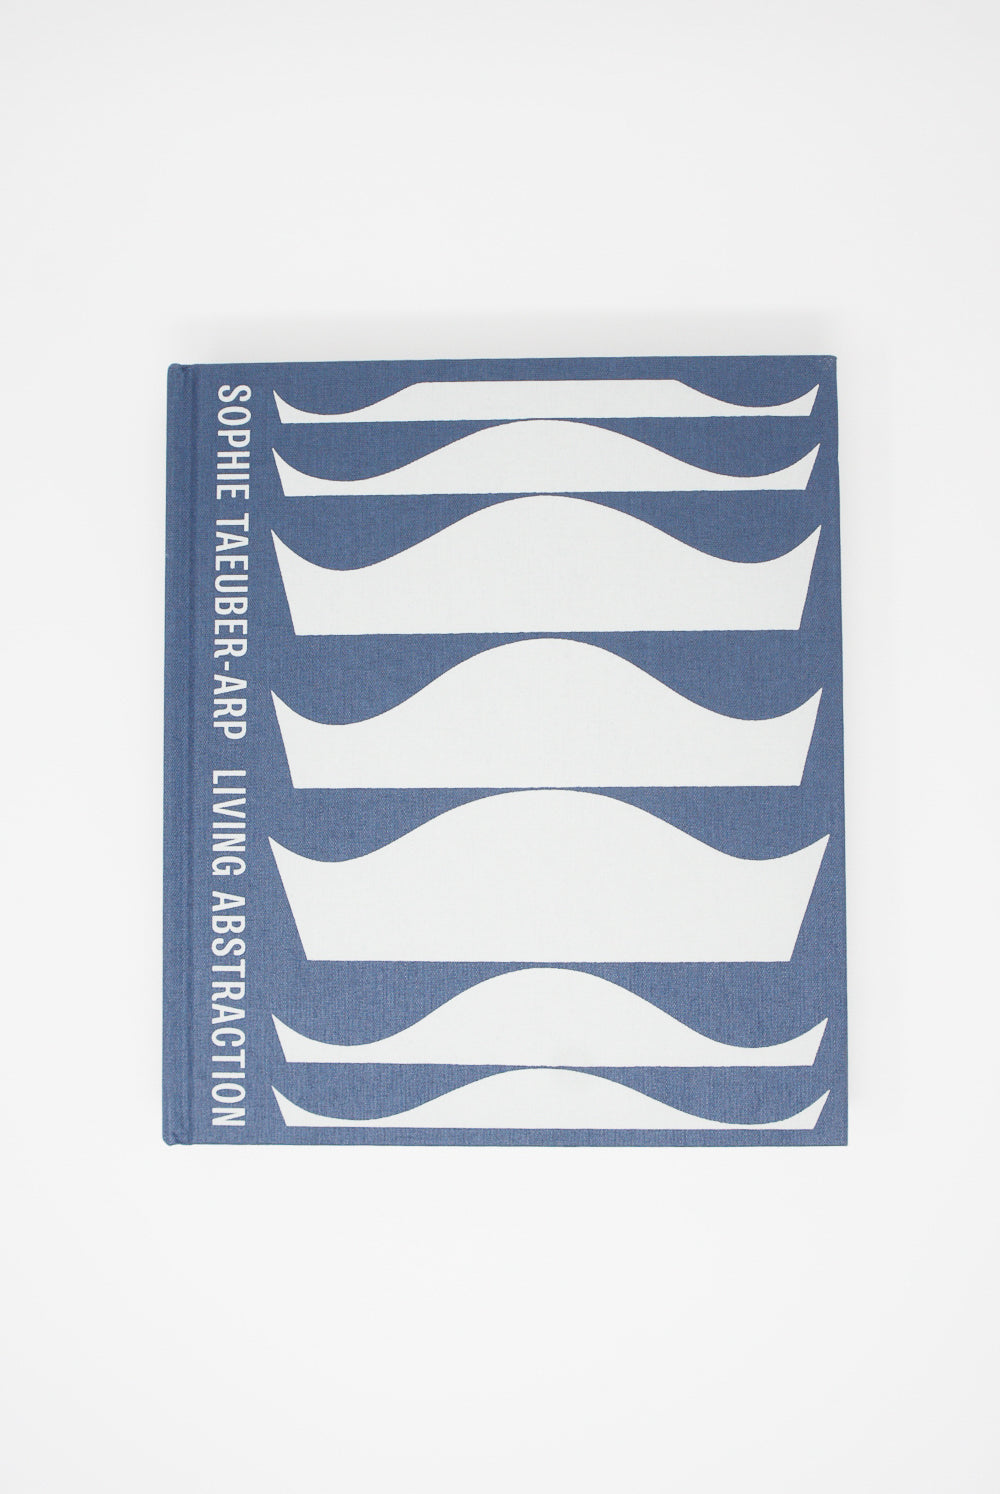 A blue Sophie Taeuber-Arp: Living Abstraction book with white lines on it, showcasing a retrospective of Taeuber-Arp's abstract artistry by Artbook/D.A.P.